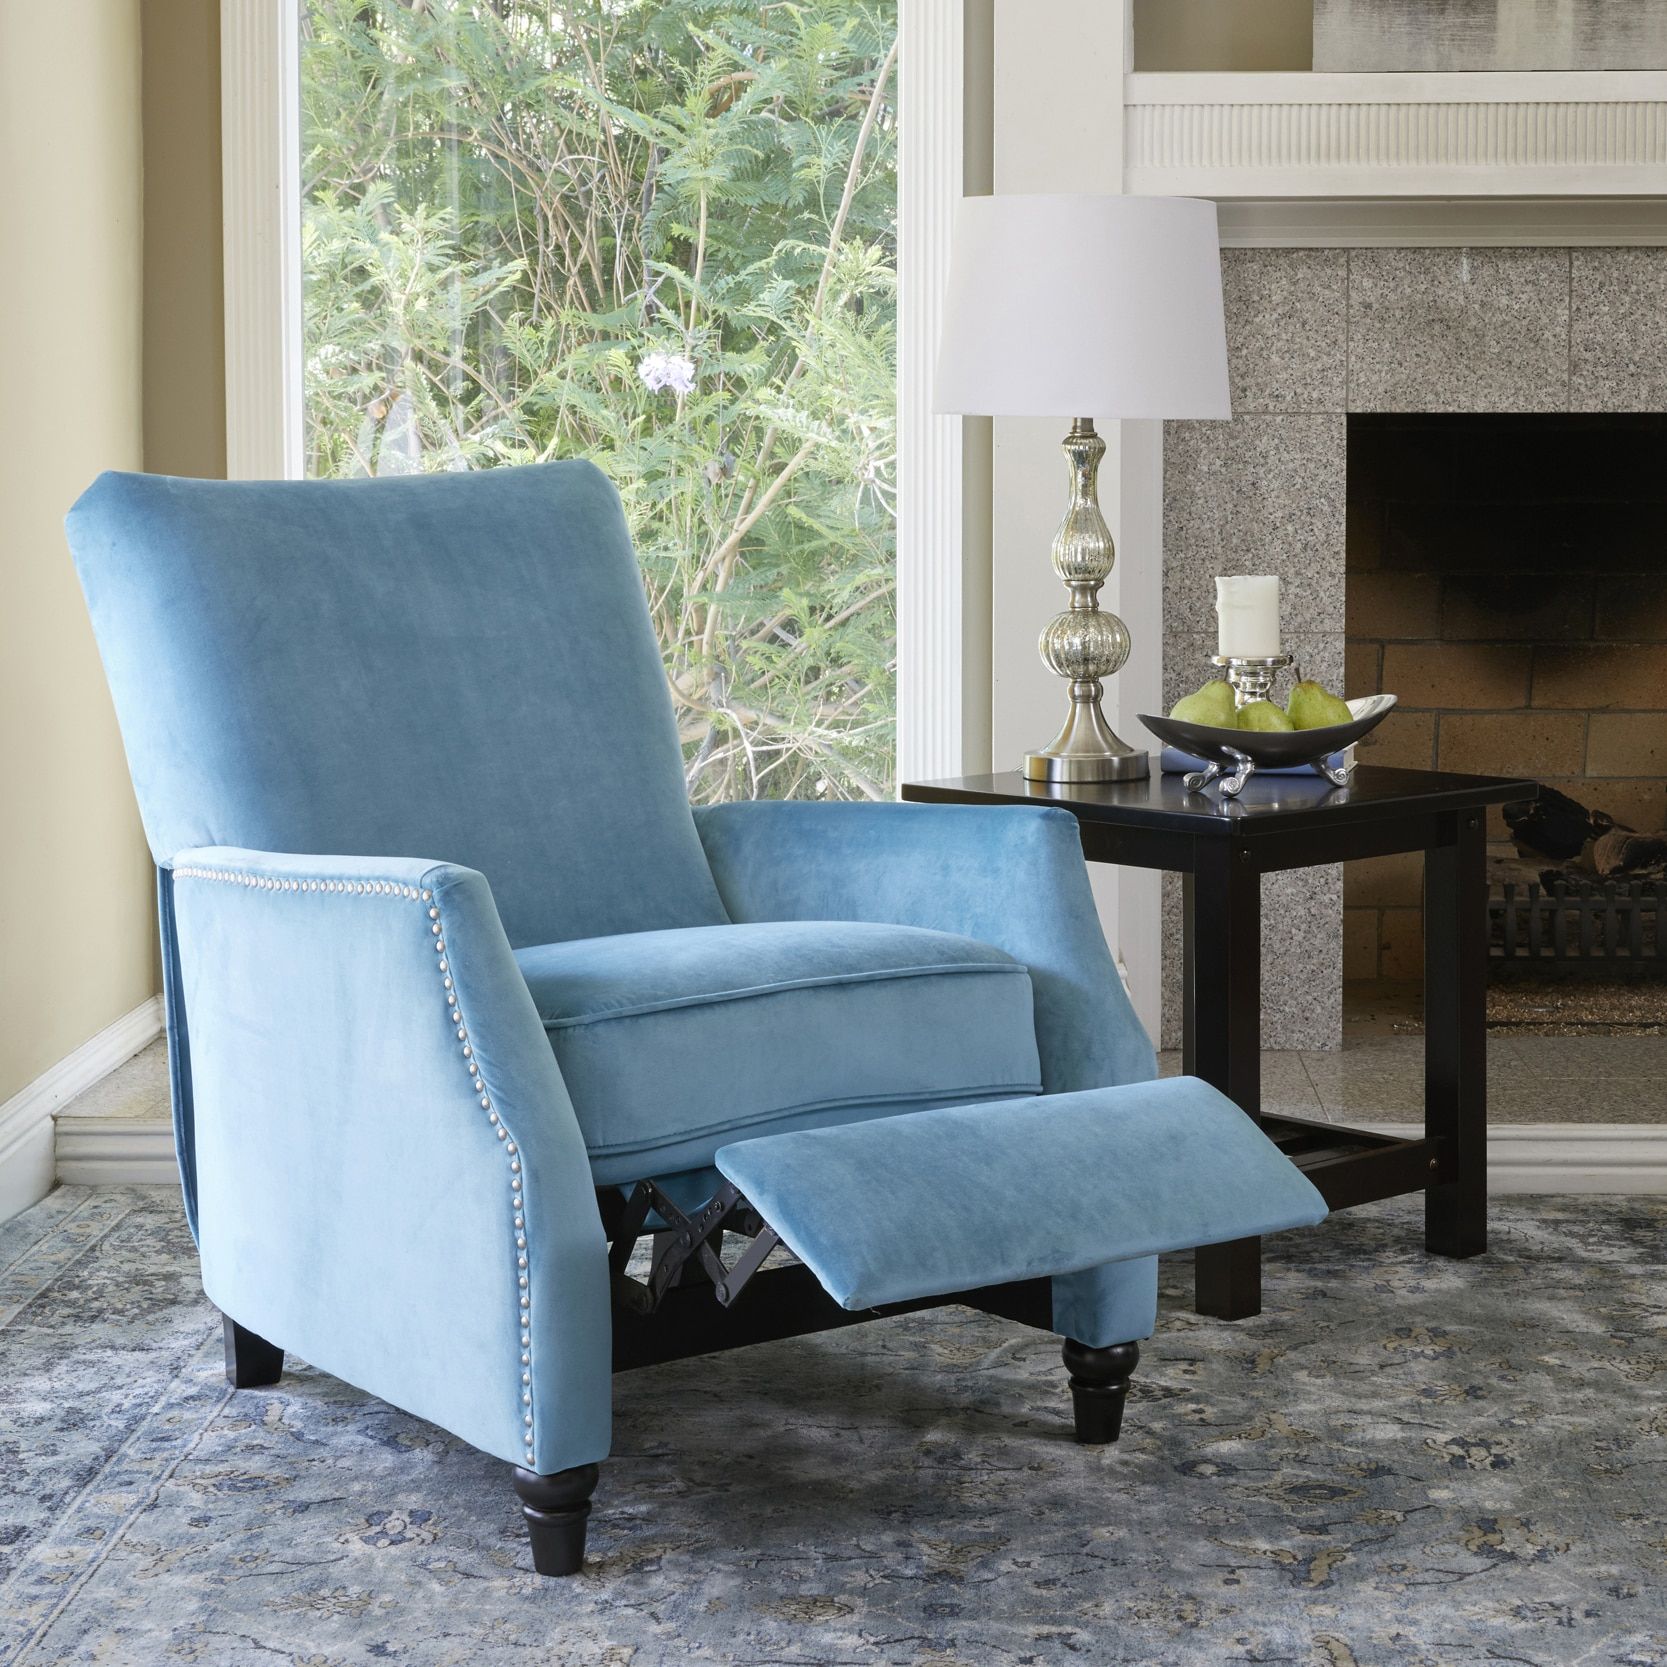 Shop Prolounger Turquoise Velvet Push Back Recliner Chair – Free With Regard To Modern Velvet Upholstered Recliner Chairs (View 10 of 20)